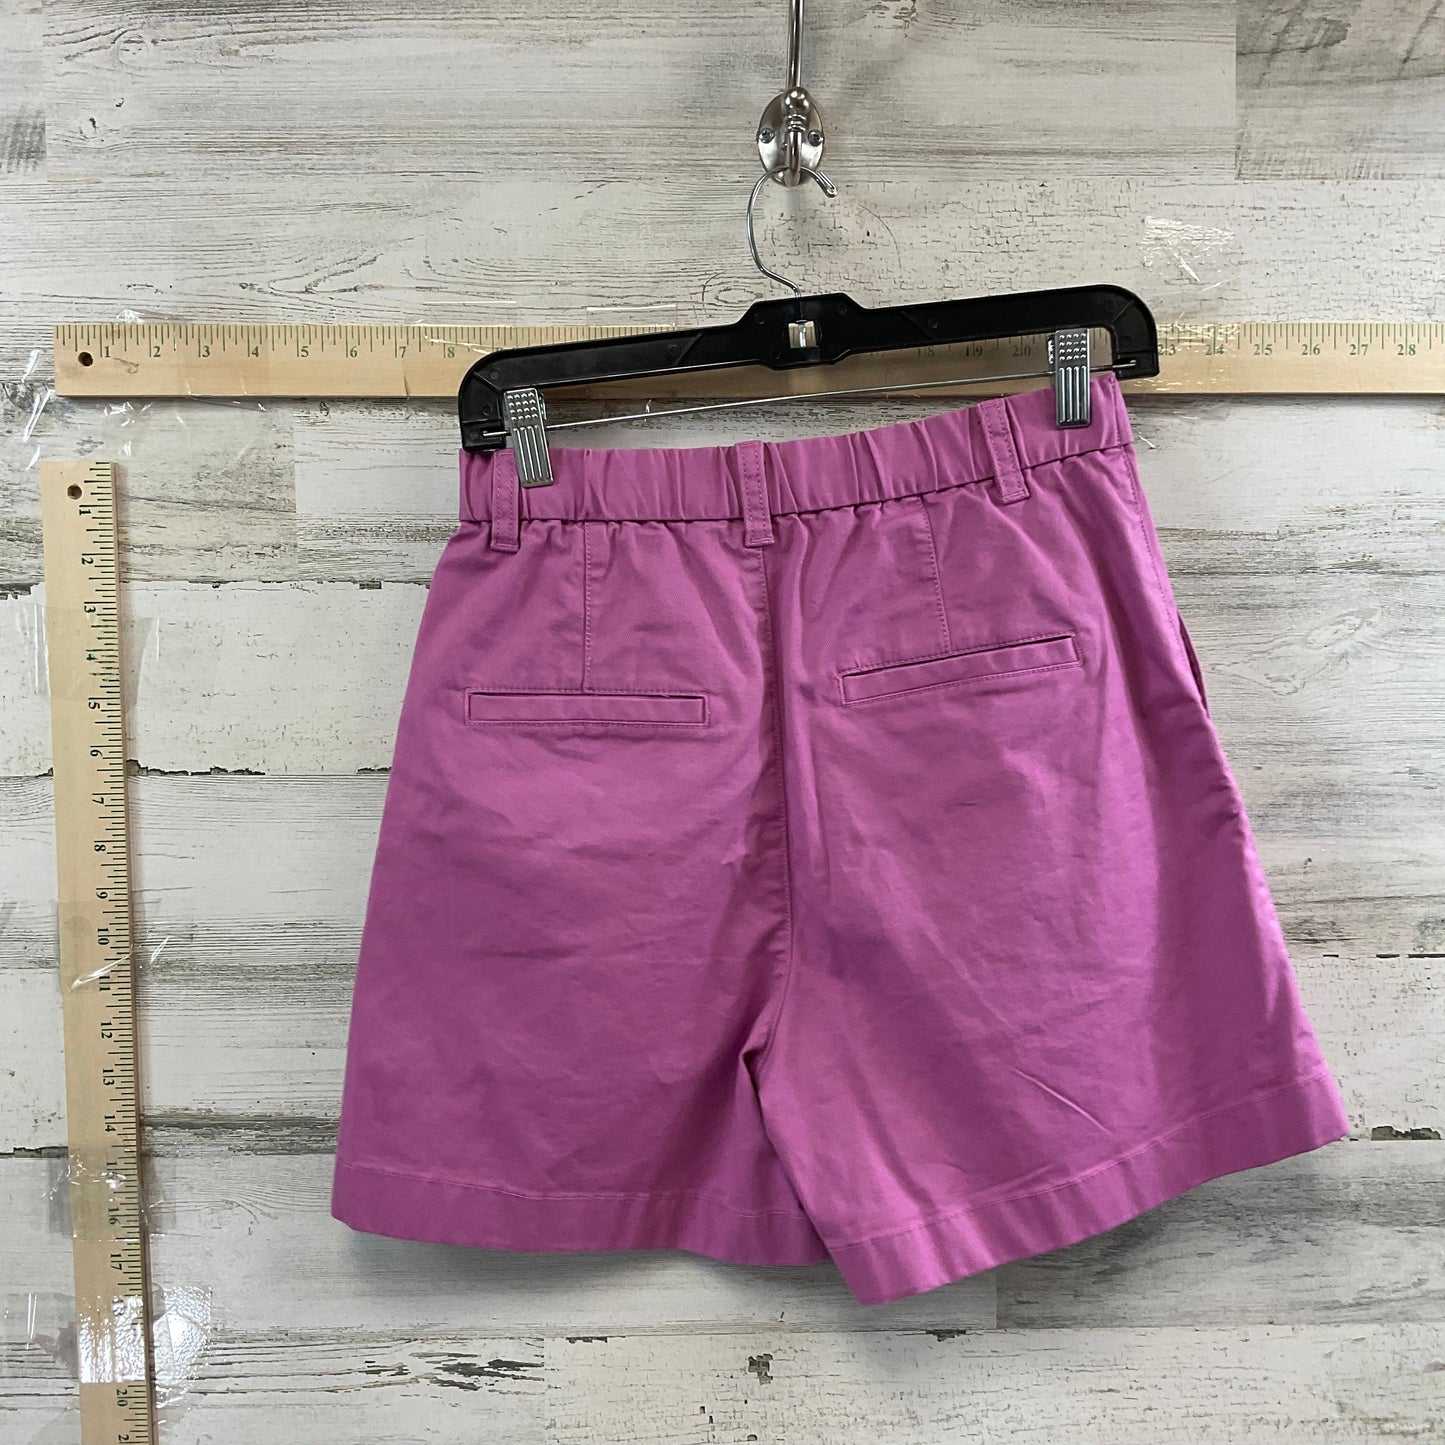 Shorts By Gap  Size: 2